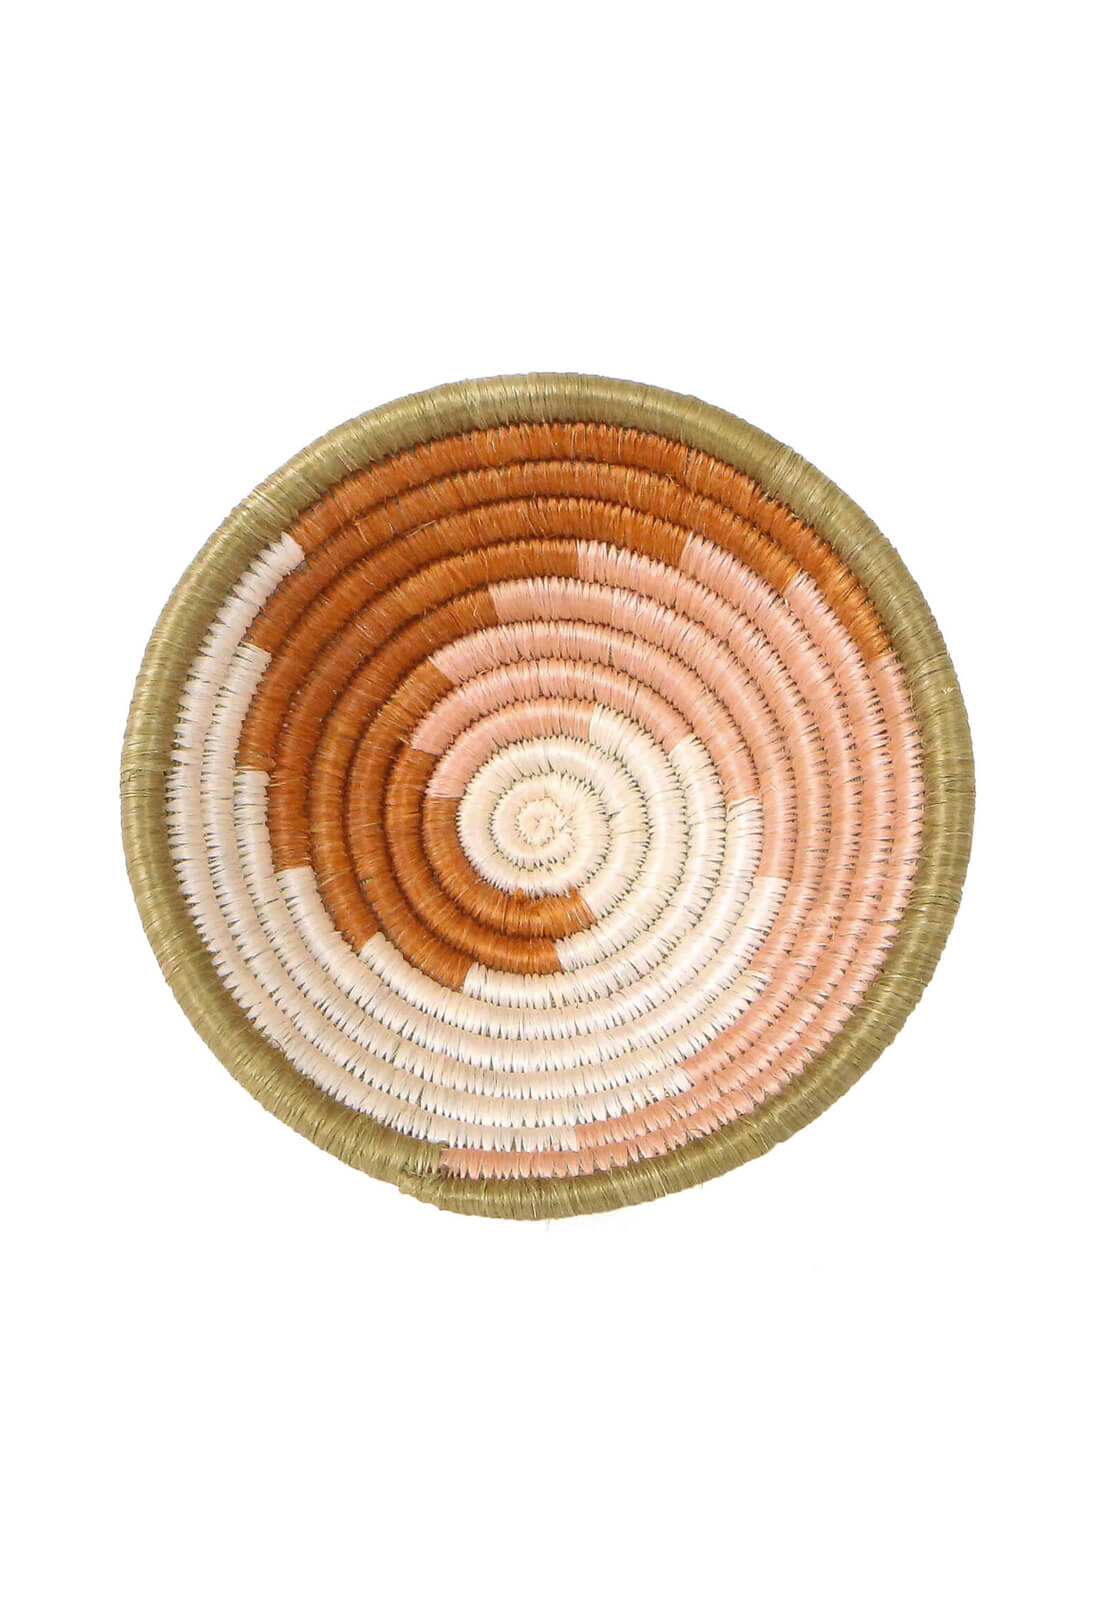 Hand Woven Plateau Basket - Canyon Clay Multicolor, Small